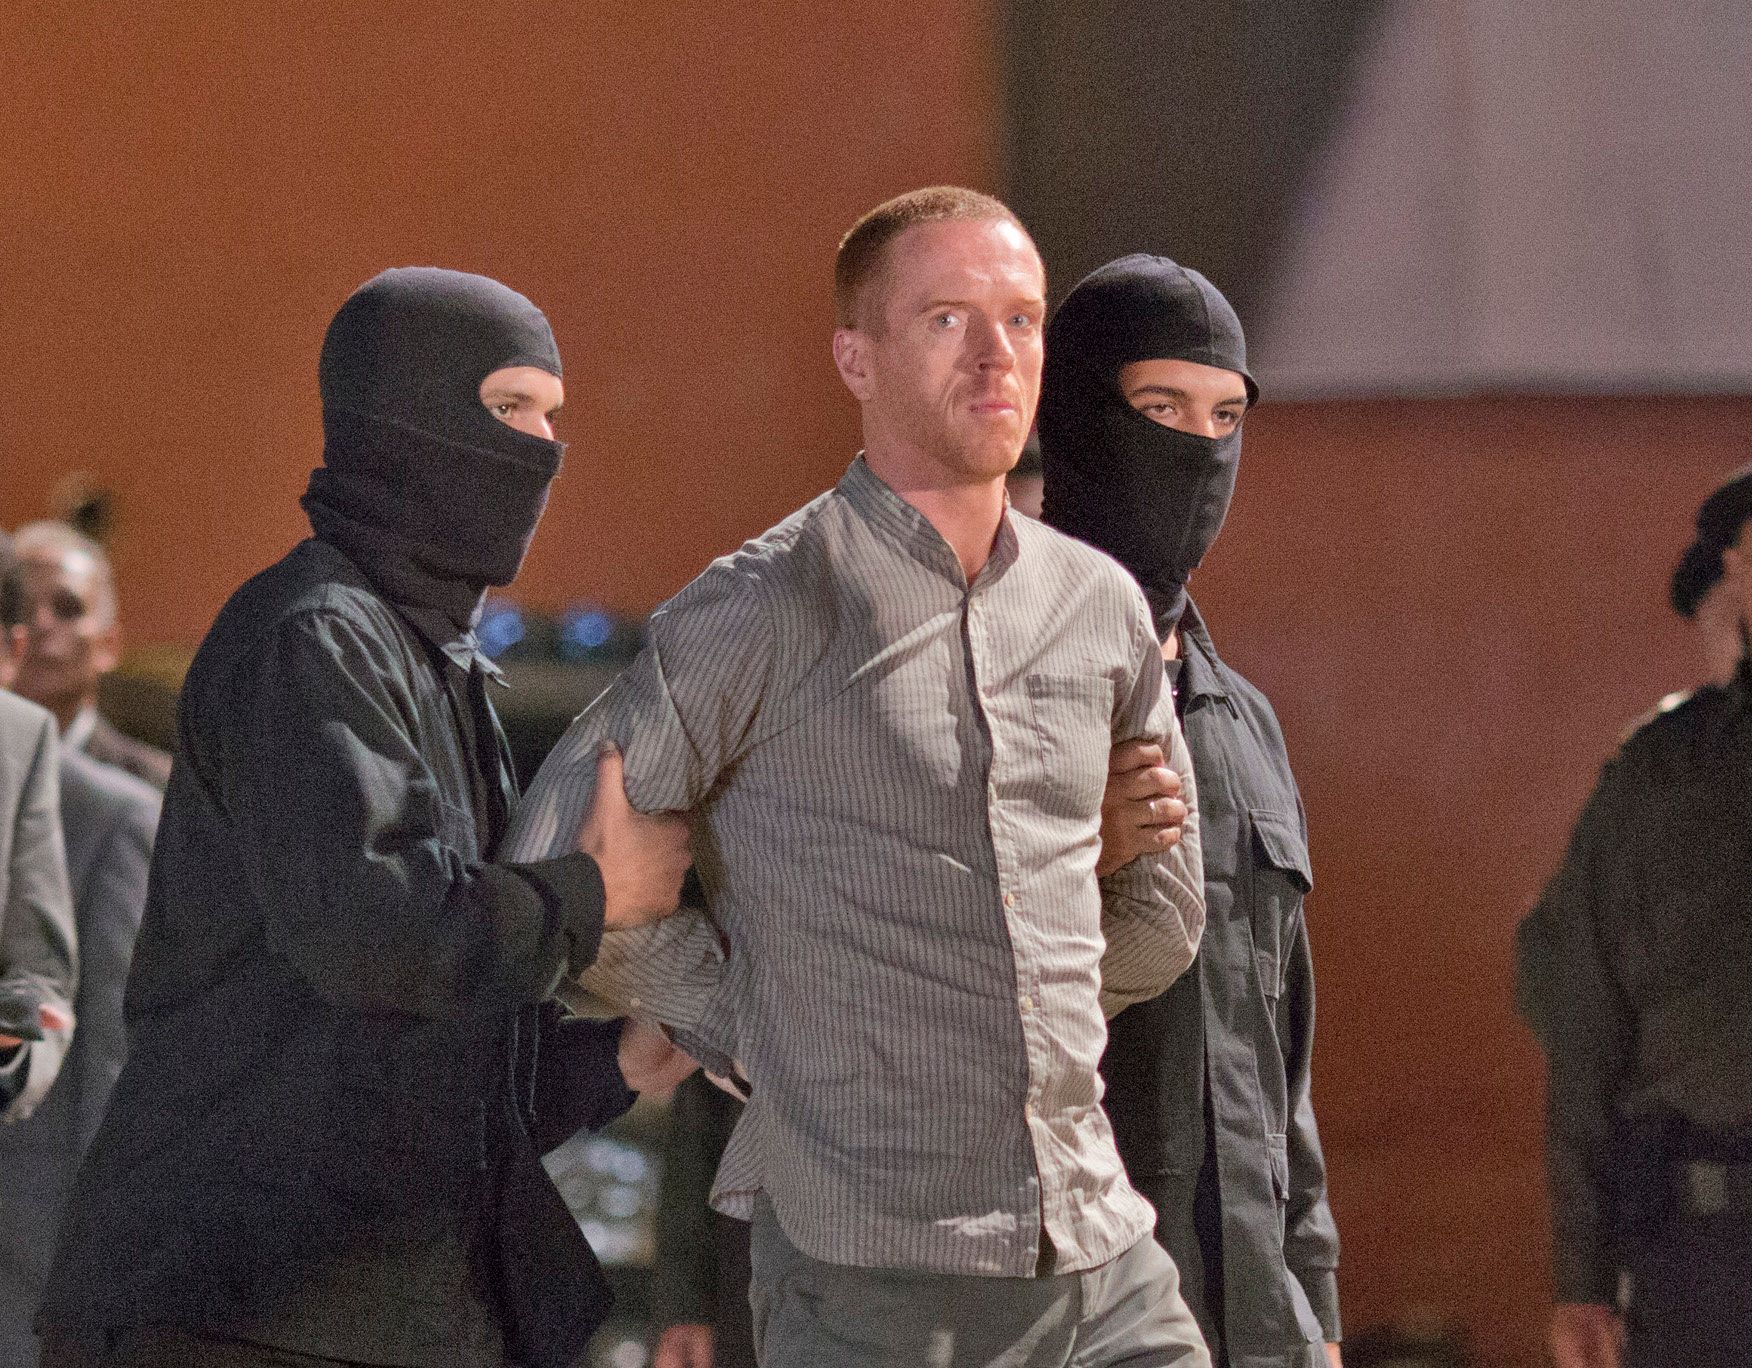 Damian Lewis as Nicholas Brody is being hauled to the gallows by two masked men in a scene from the show Homeland